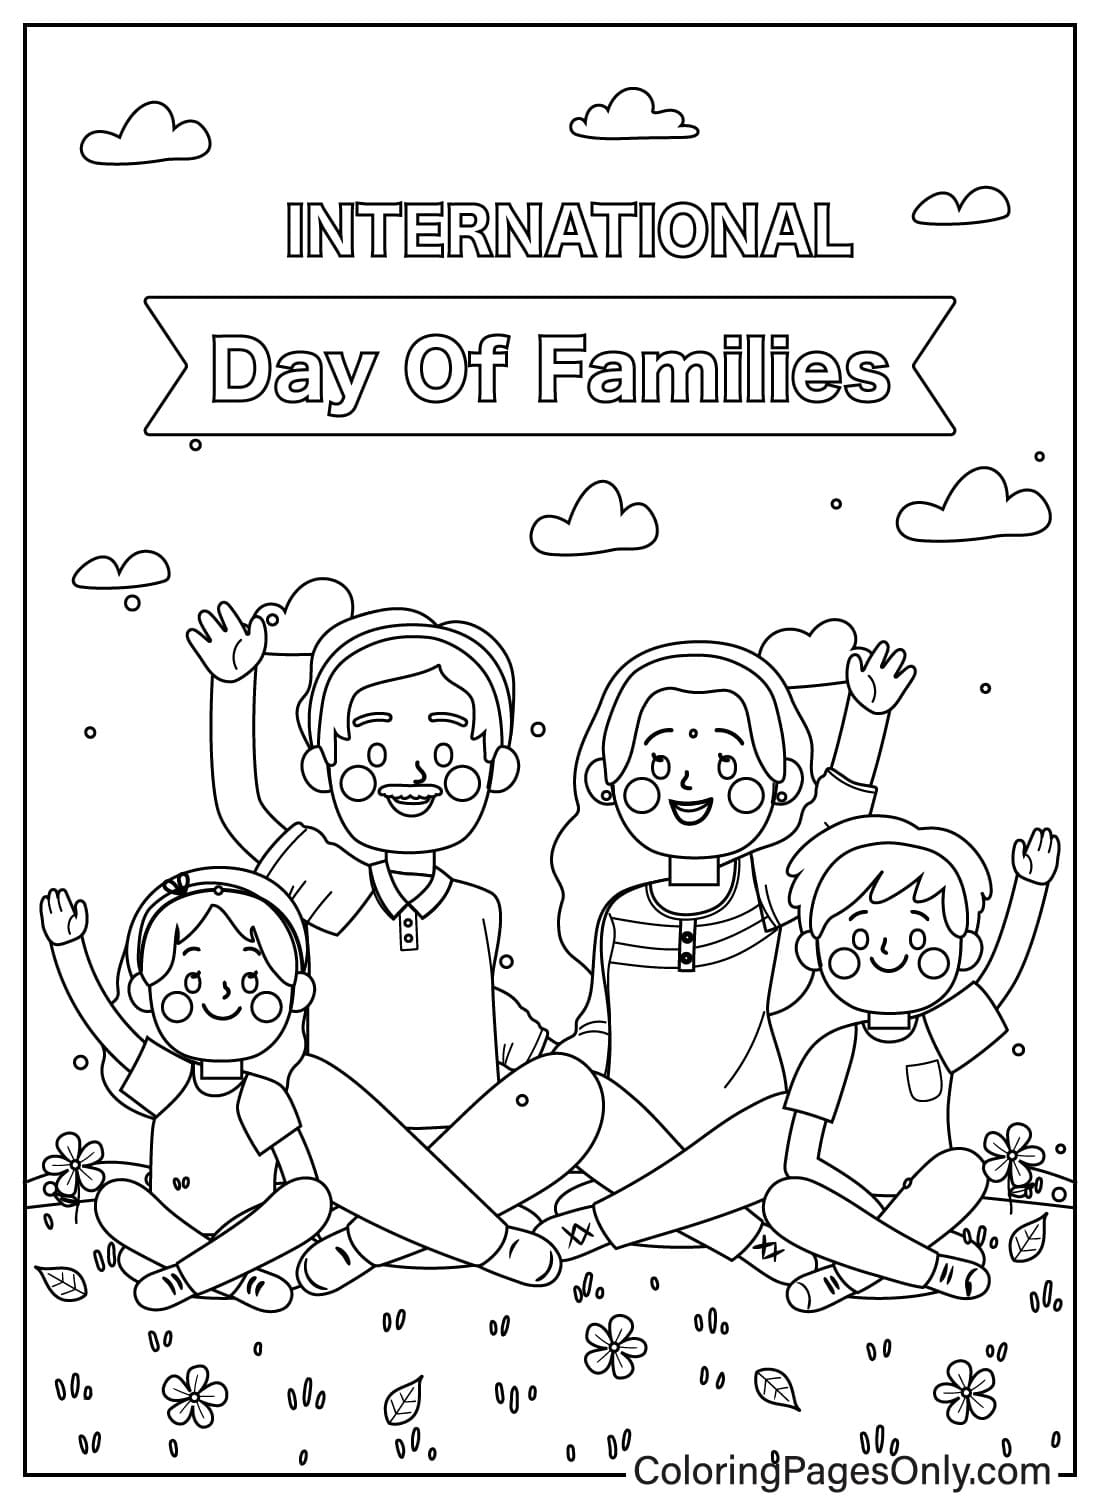 Family Day Coloring Page to Print from Family Day